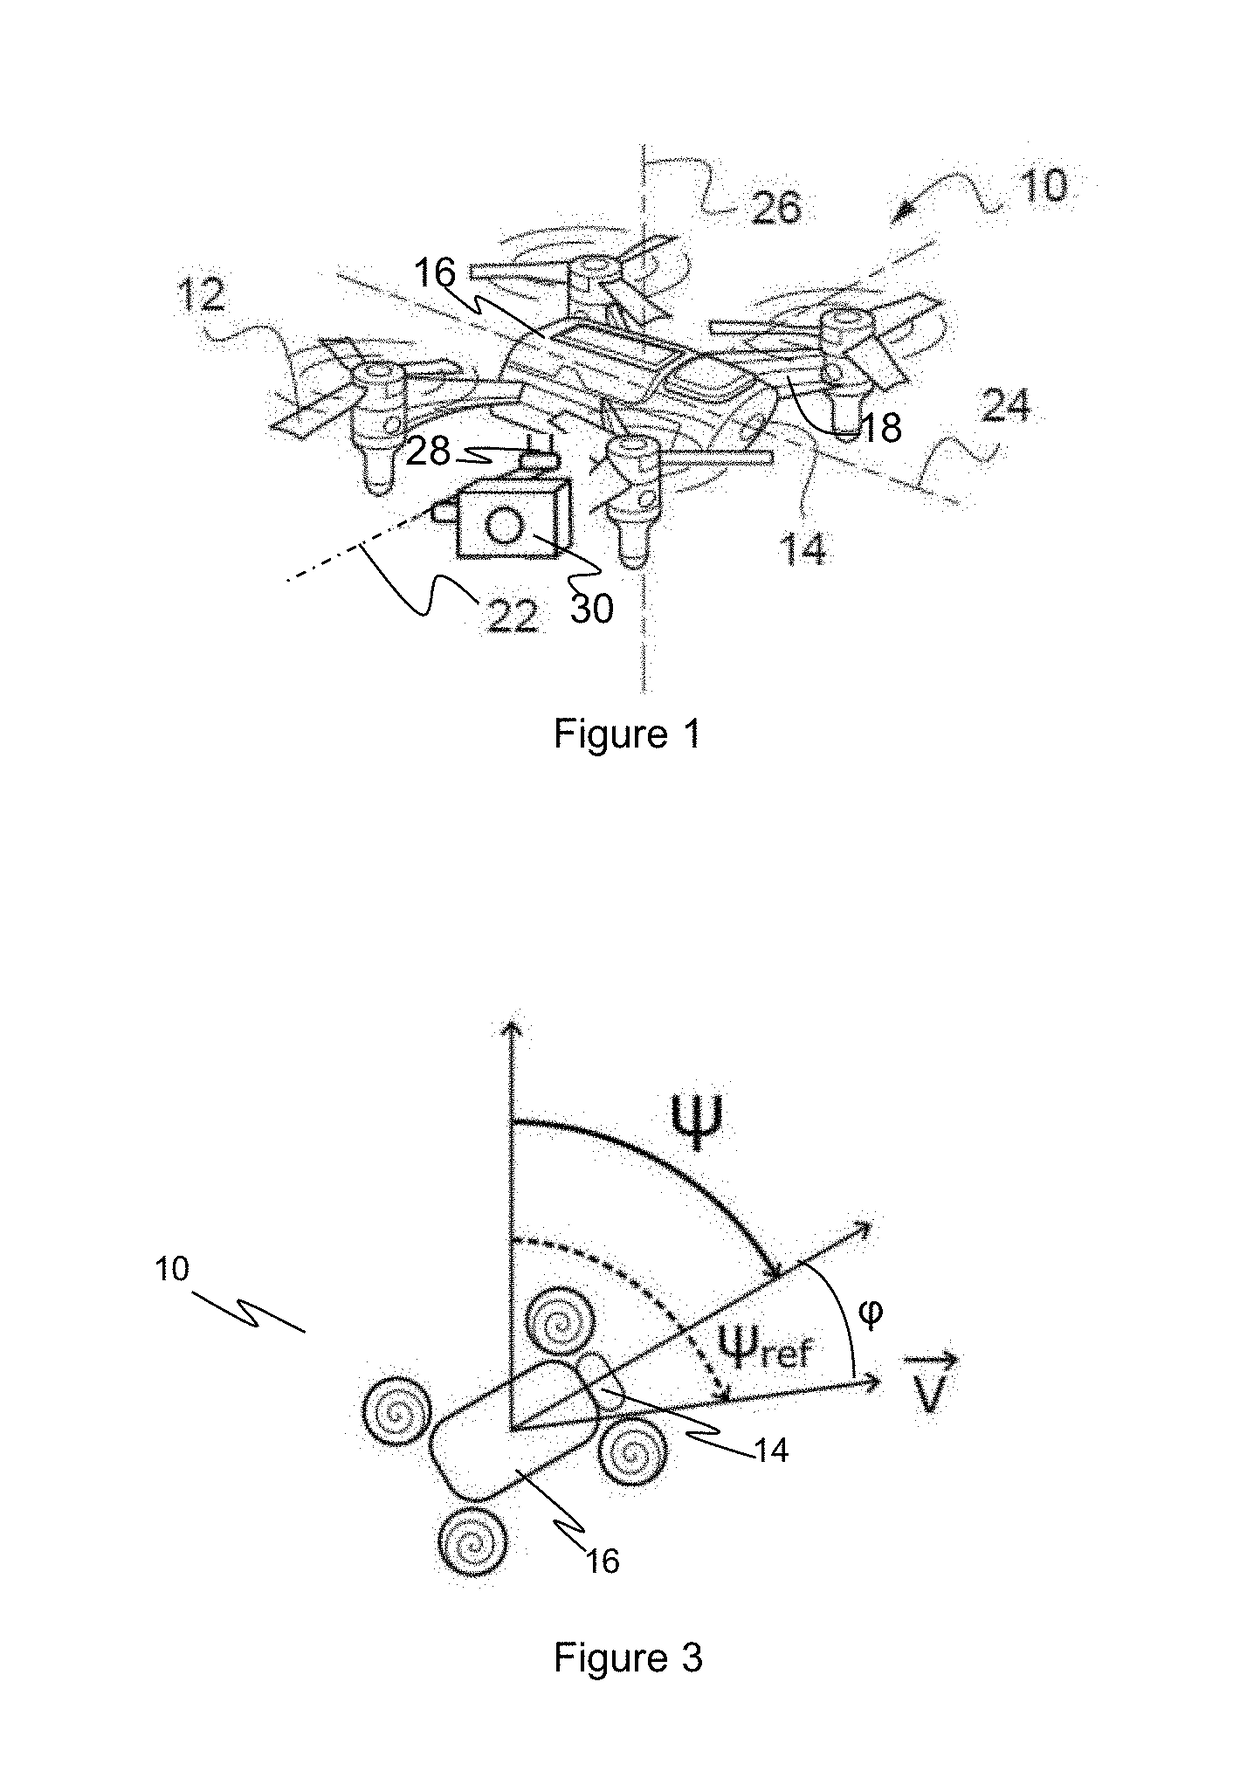 Drone with an obstacle avoiding system